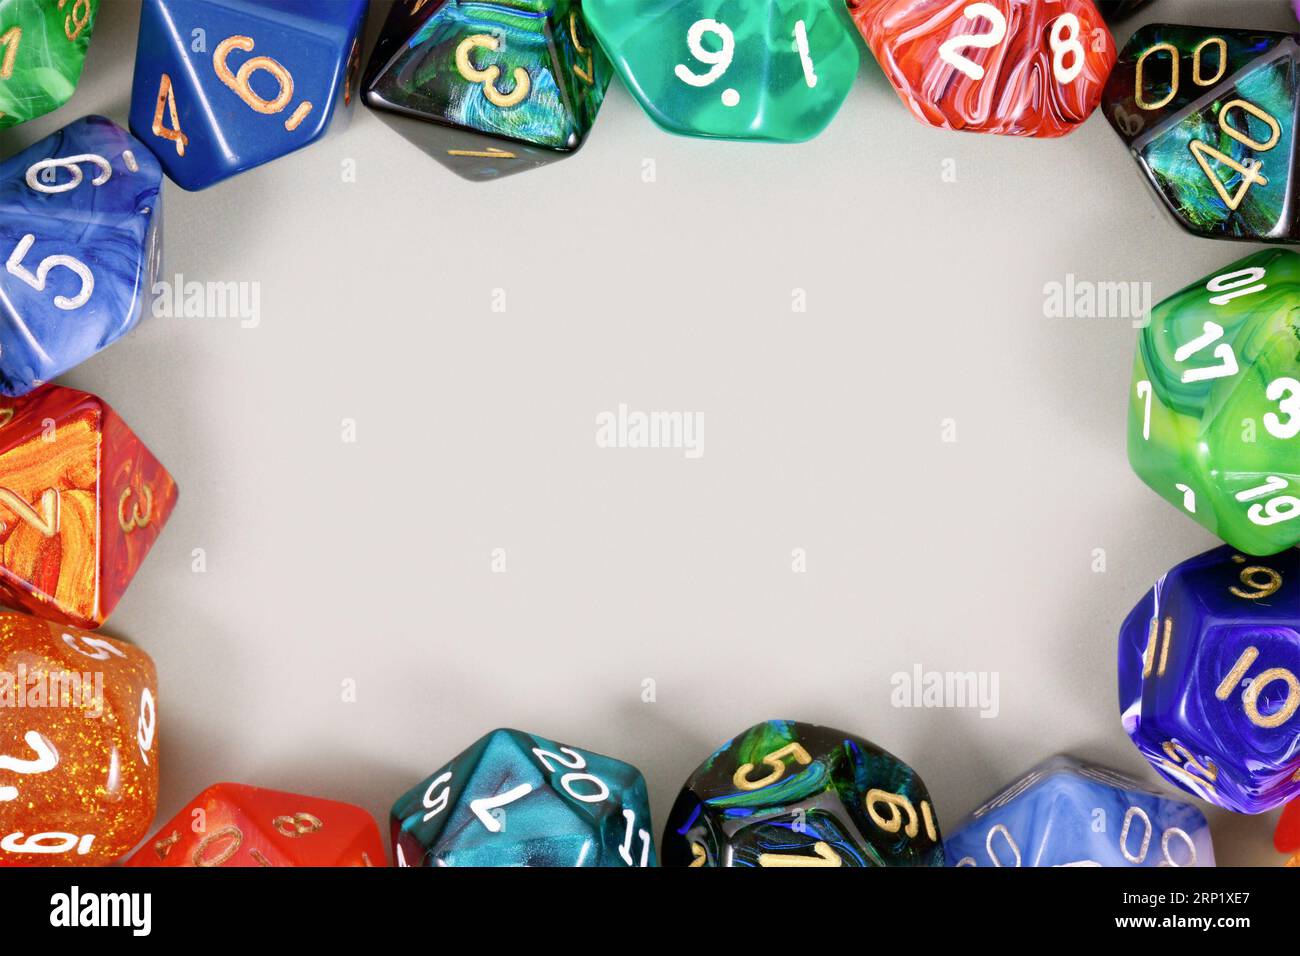 Colorful role playing RPG dice forming border around gray background with copy space Stock Photo